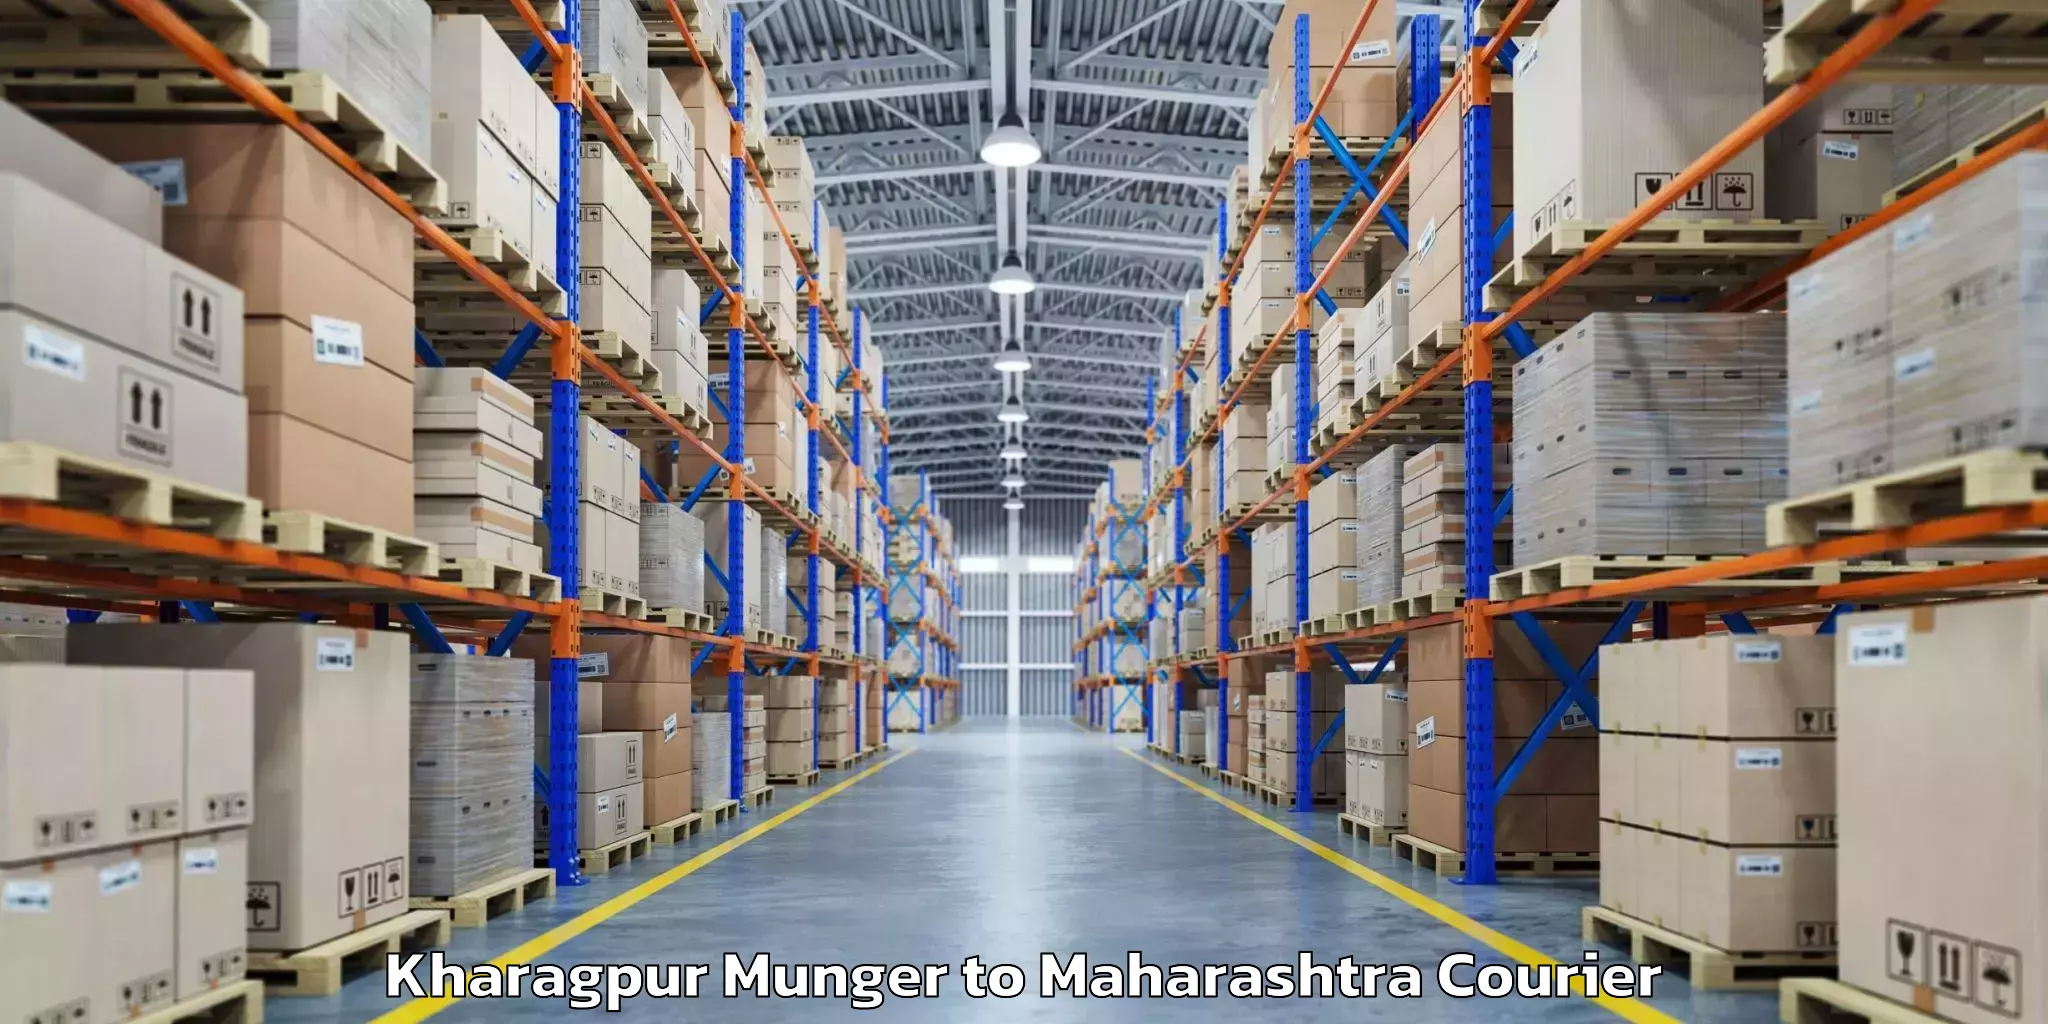 Luggage shipment specialists Kharagpur Munger to Saoner